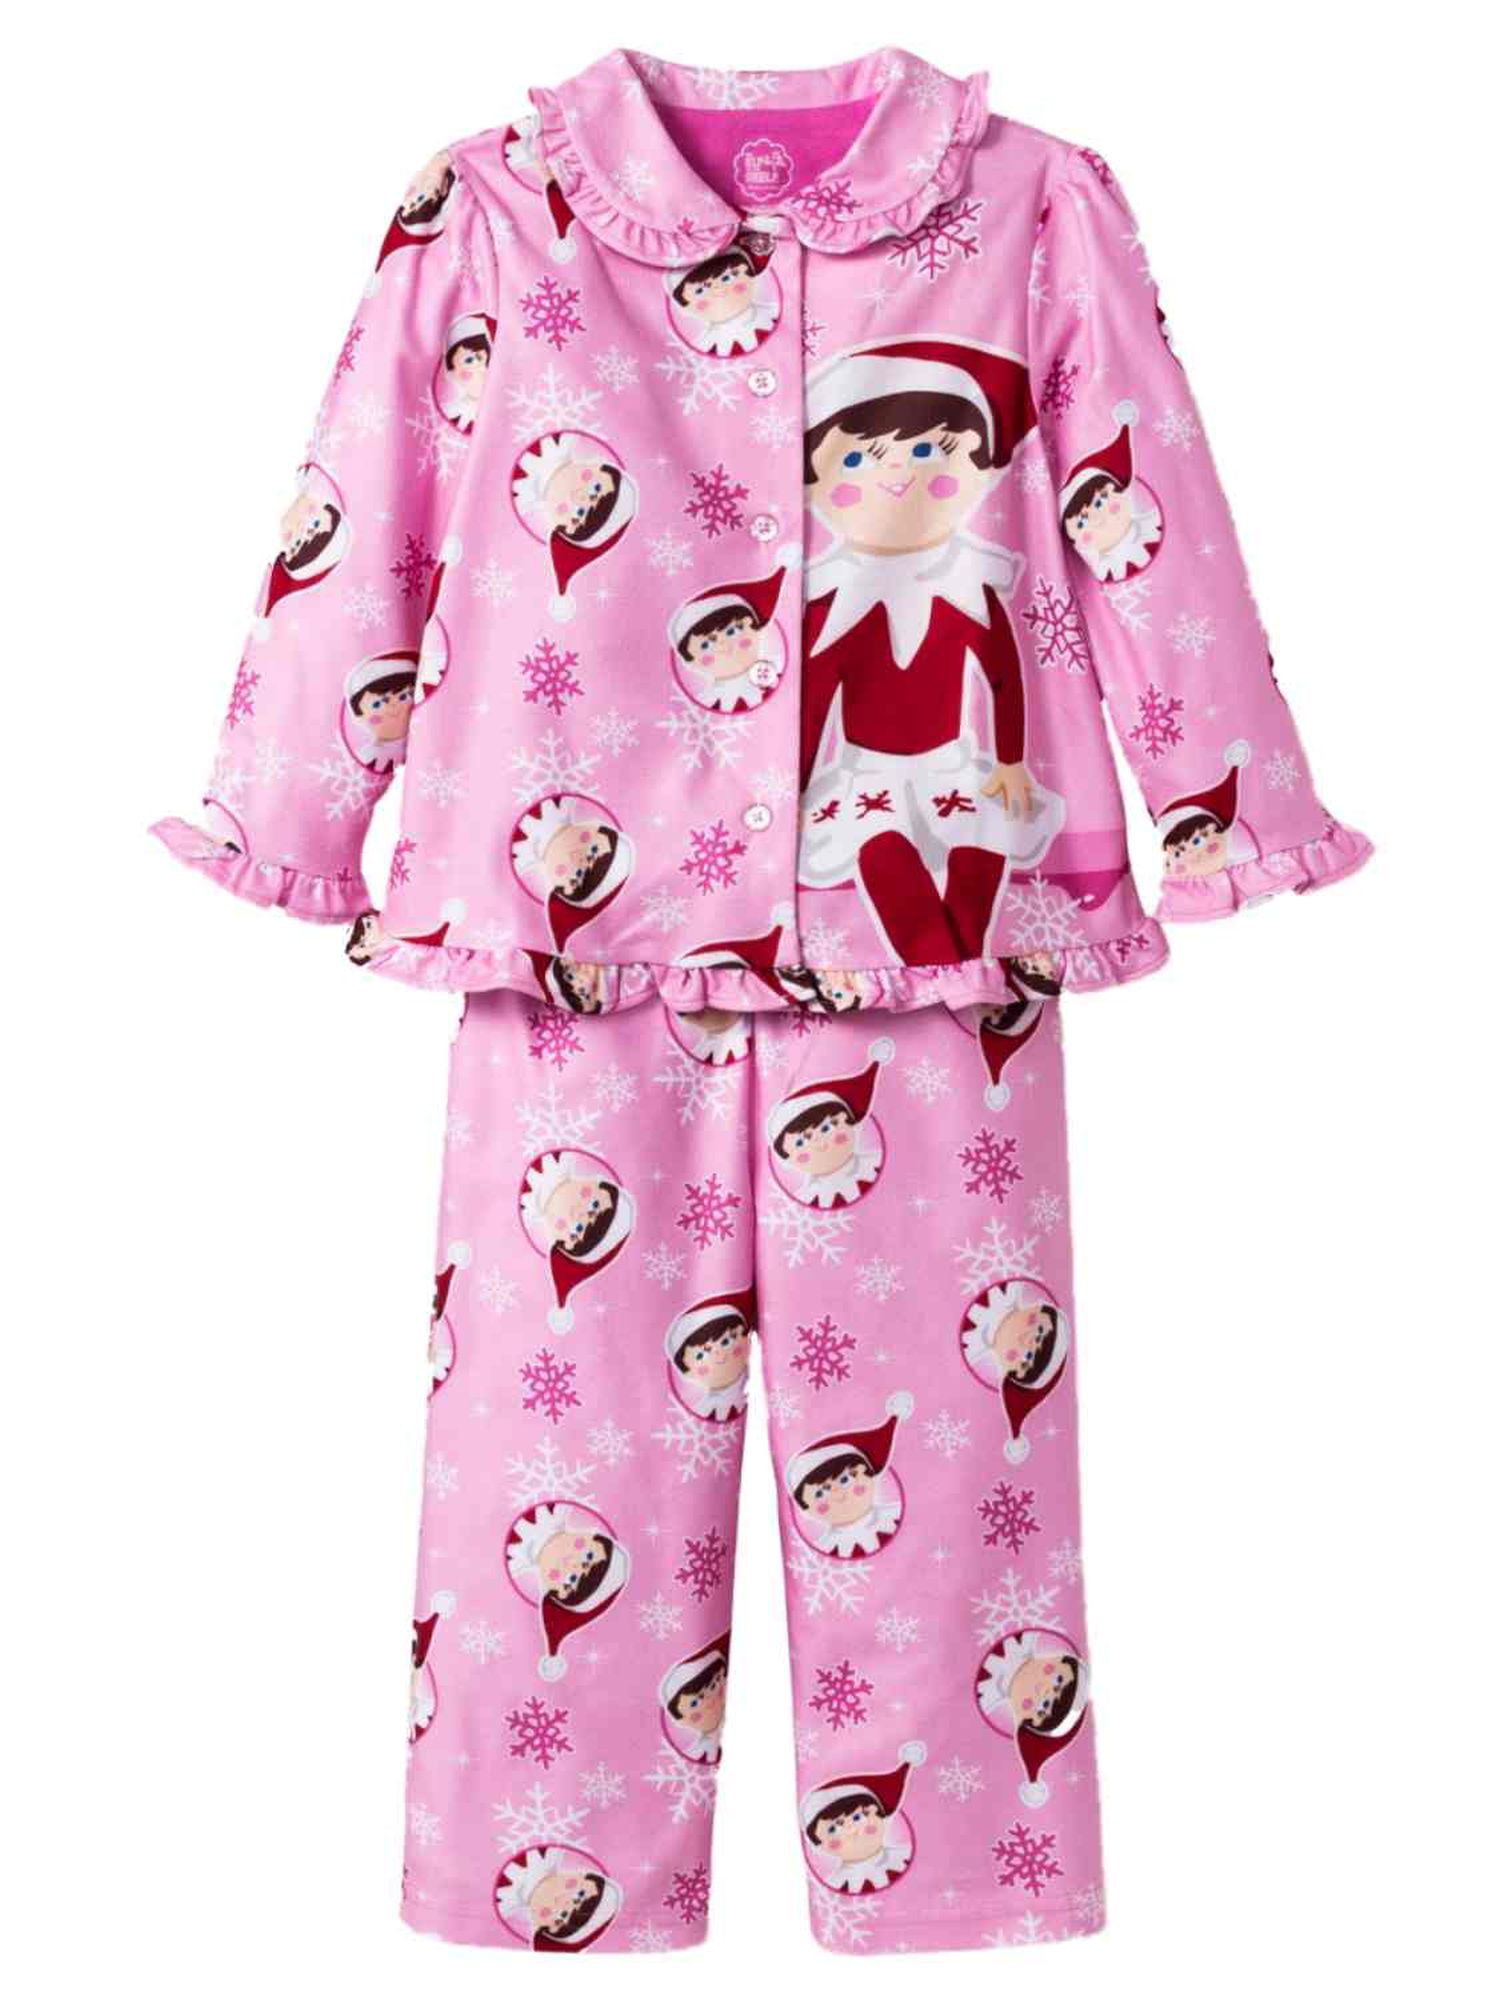 Details about   ELF ON THE SHELF 3T CHRISTMAS PAJAMAS Cute Footed Morning Toddler Girls PJs NEW 